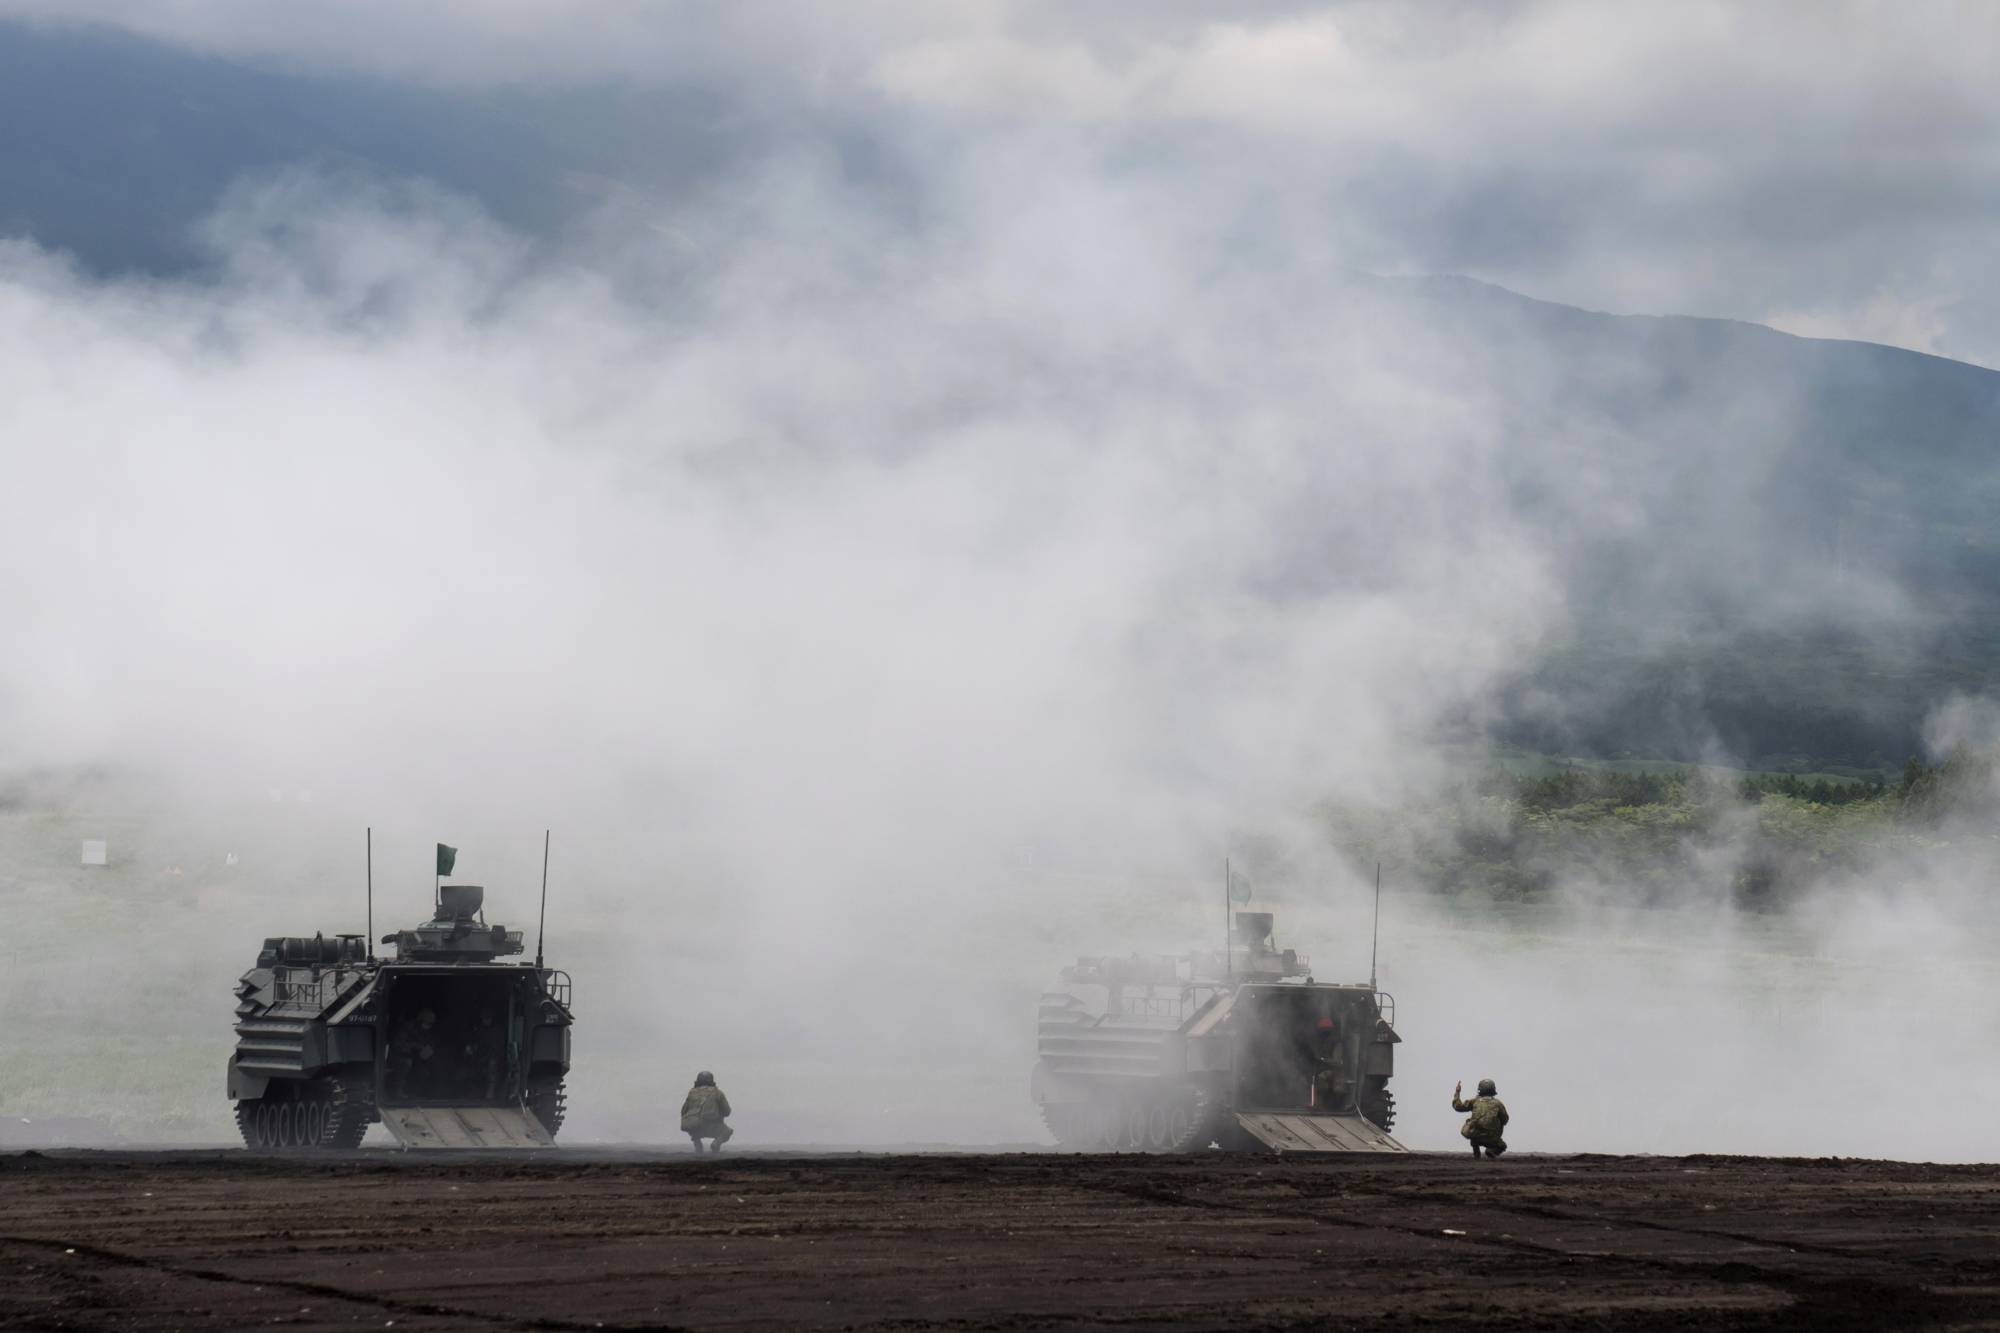 Ground Self-Defense Force amphibious assault vehicles take part in a live-fire exercise in Gotemba, Shizuoka Prefecture, in May.  | POOL / VIA REUTERS